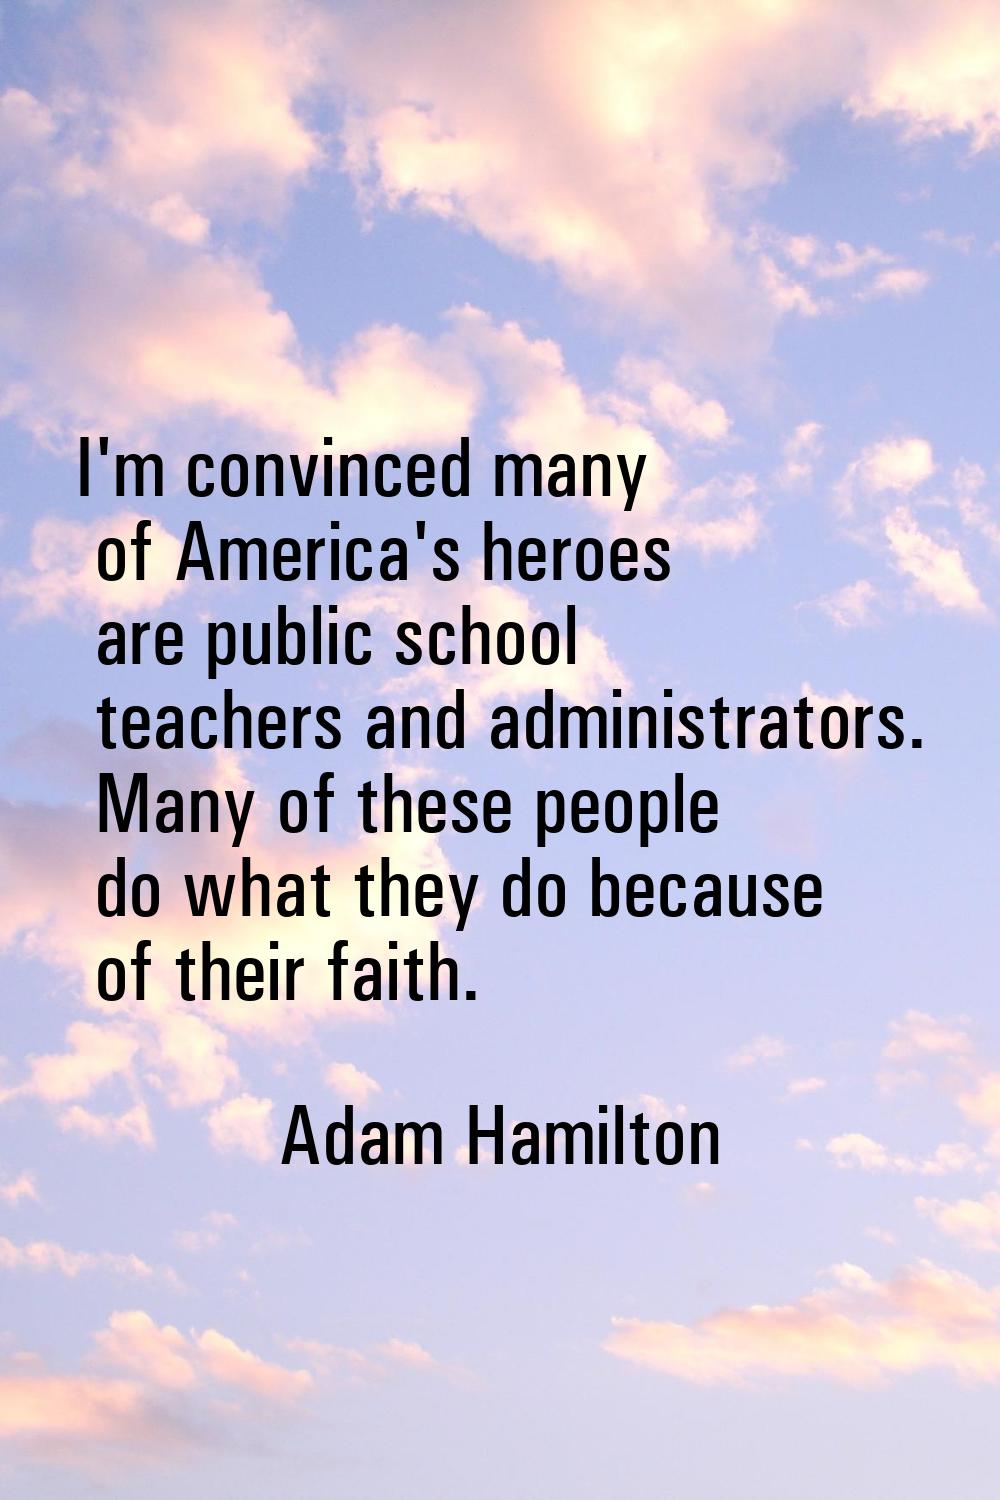 I'm convinced many of America's heroes are public school teachers and administrators. Many of these